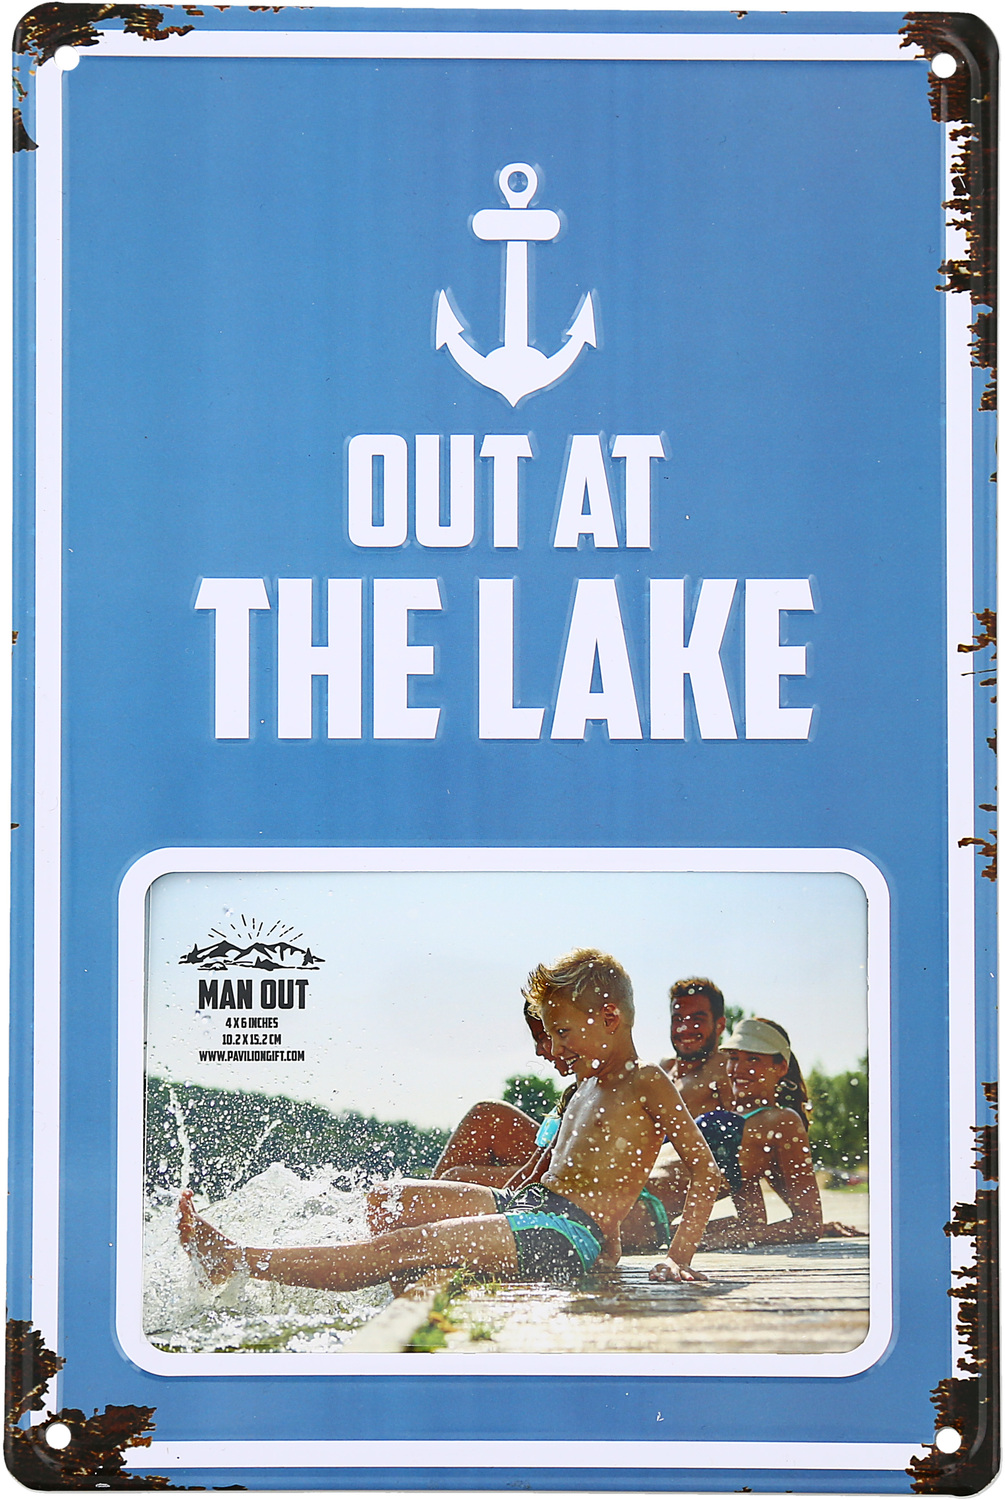 Out at the Lake by Man Out - Out at the Lake - 8" x 11.75" Tin Frame
(Holds 6" x 4" Photo)